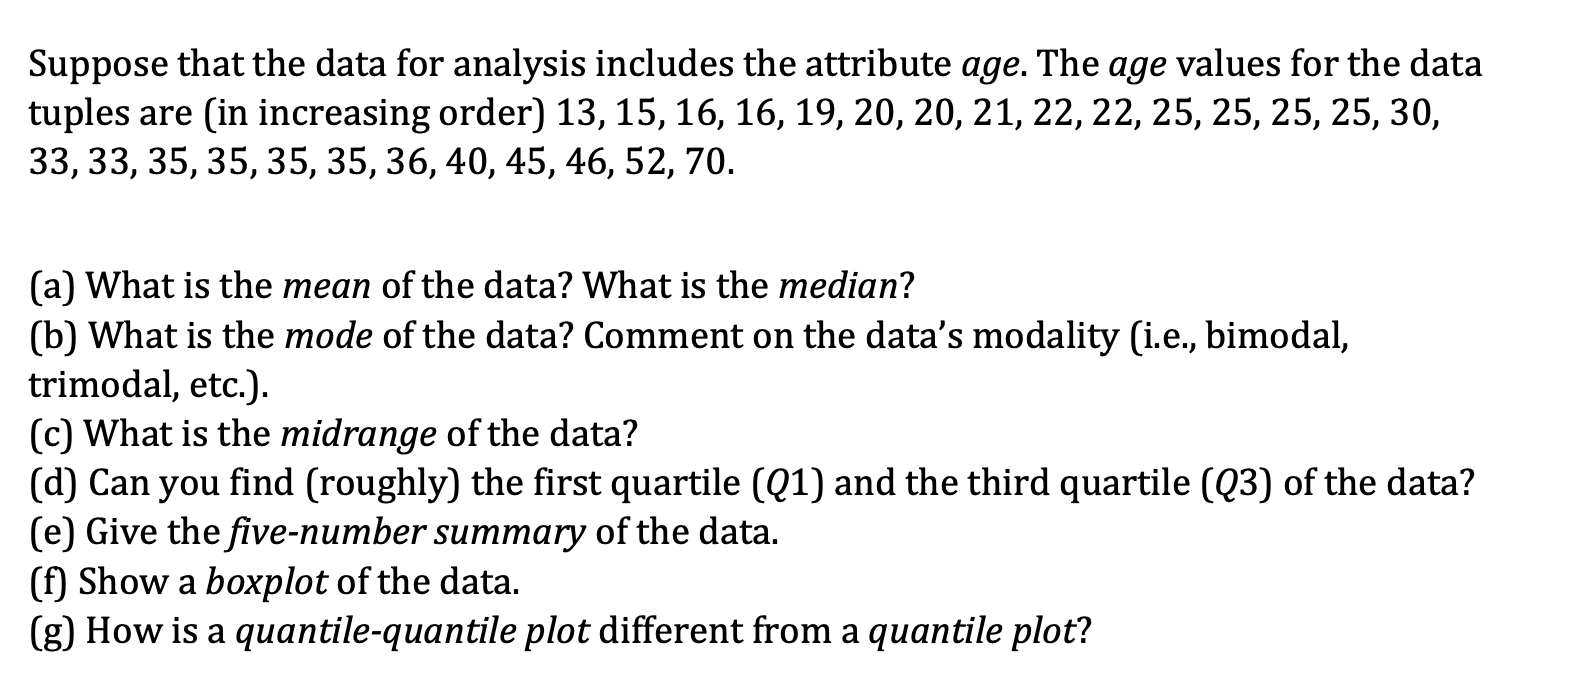 Suppose that the data for analysis includes the attribute age. The age values for the data tuples are (in